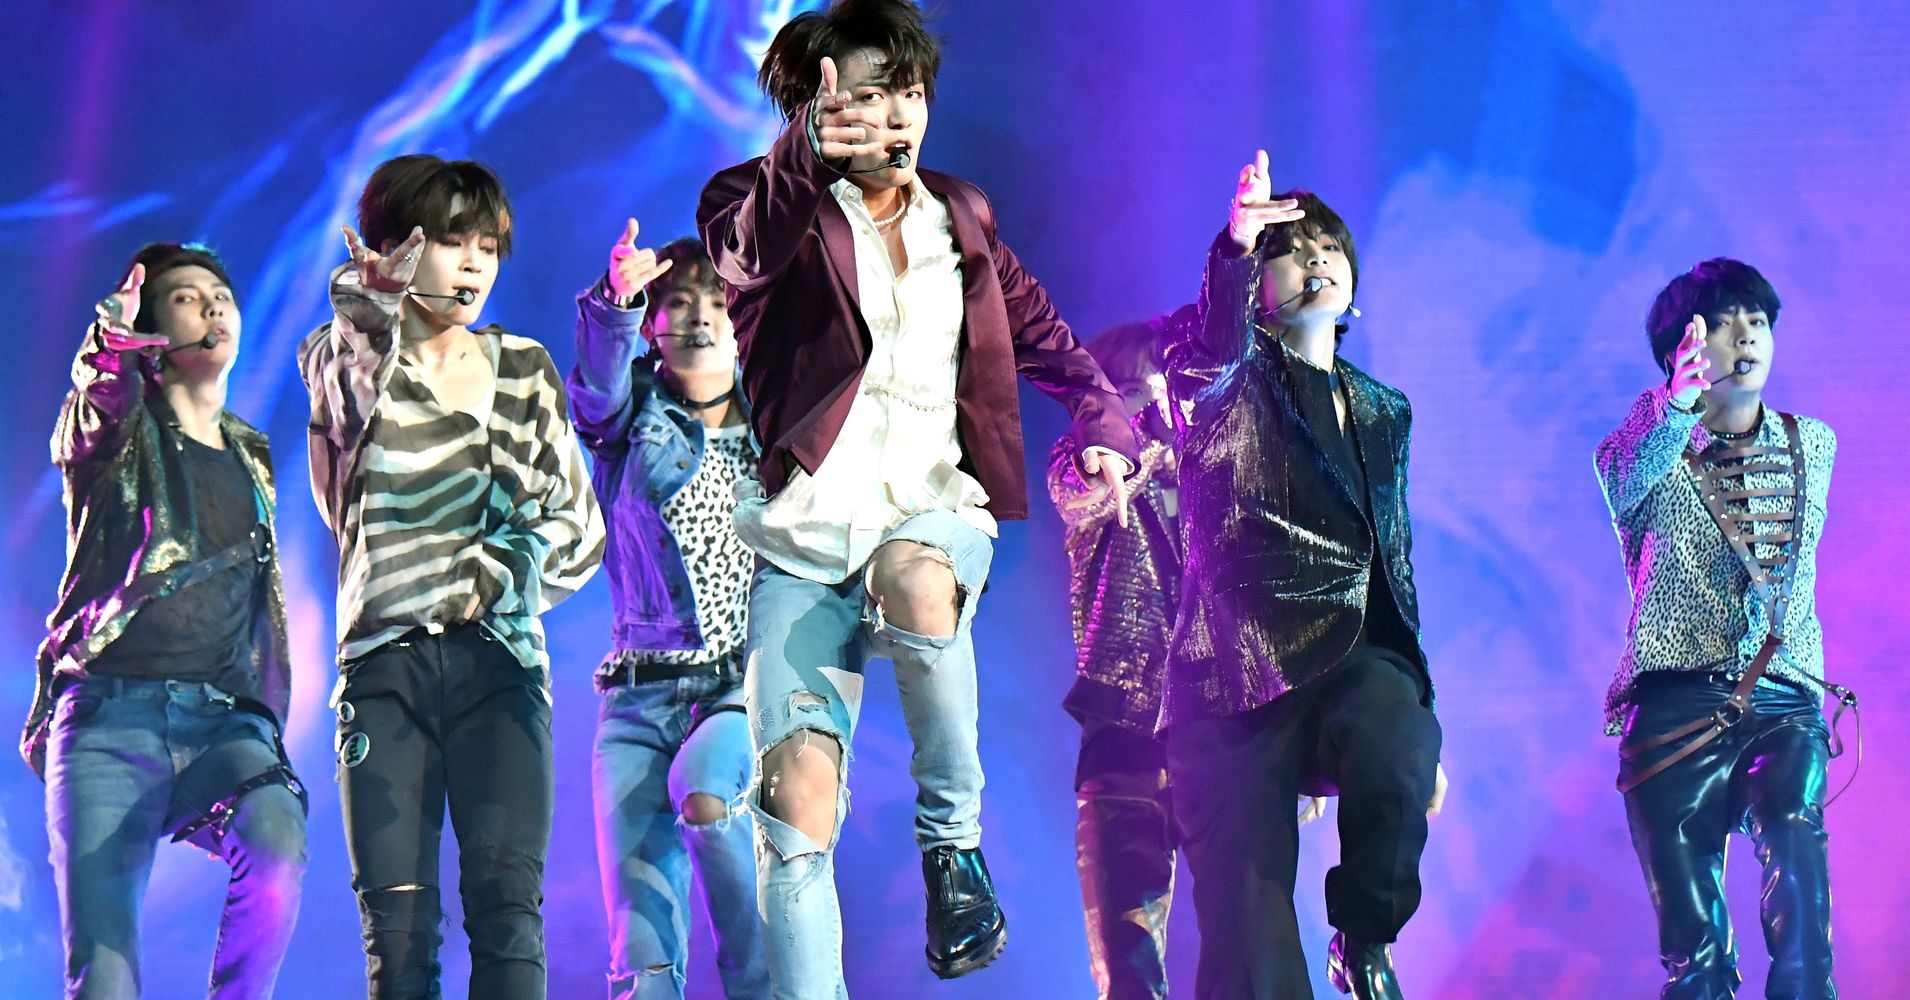 K Pop Band Bts Slays Performance At Billboard Music Awards Because They